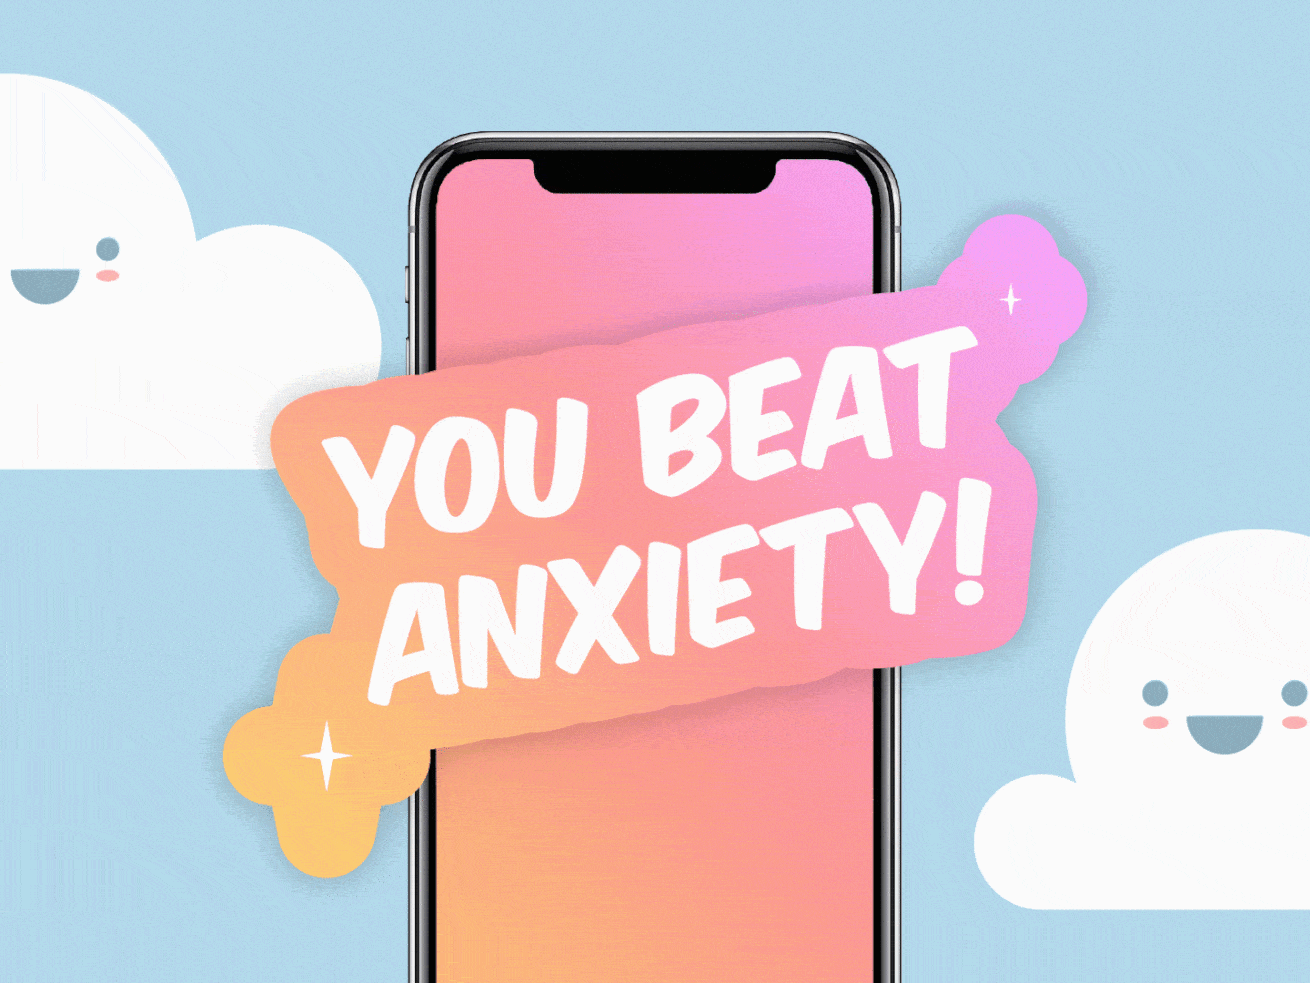 These apps make a game out of relieving anxiety. They may be onto something.